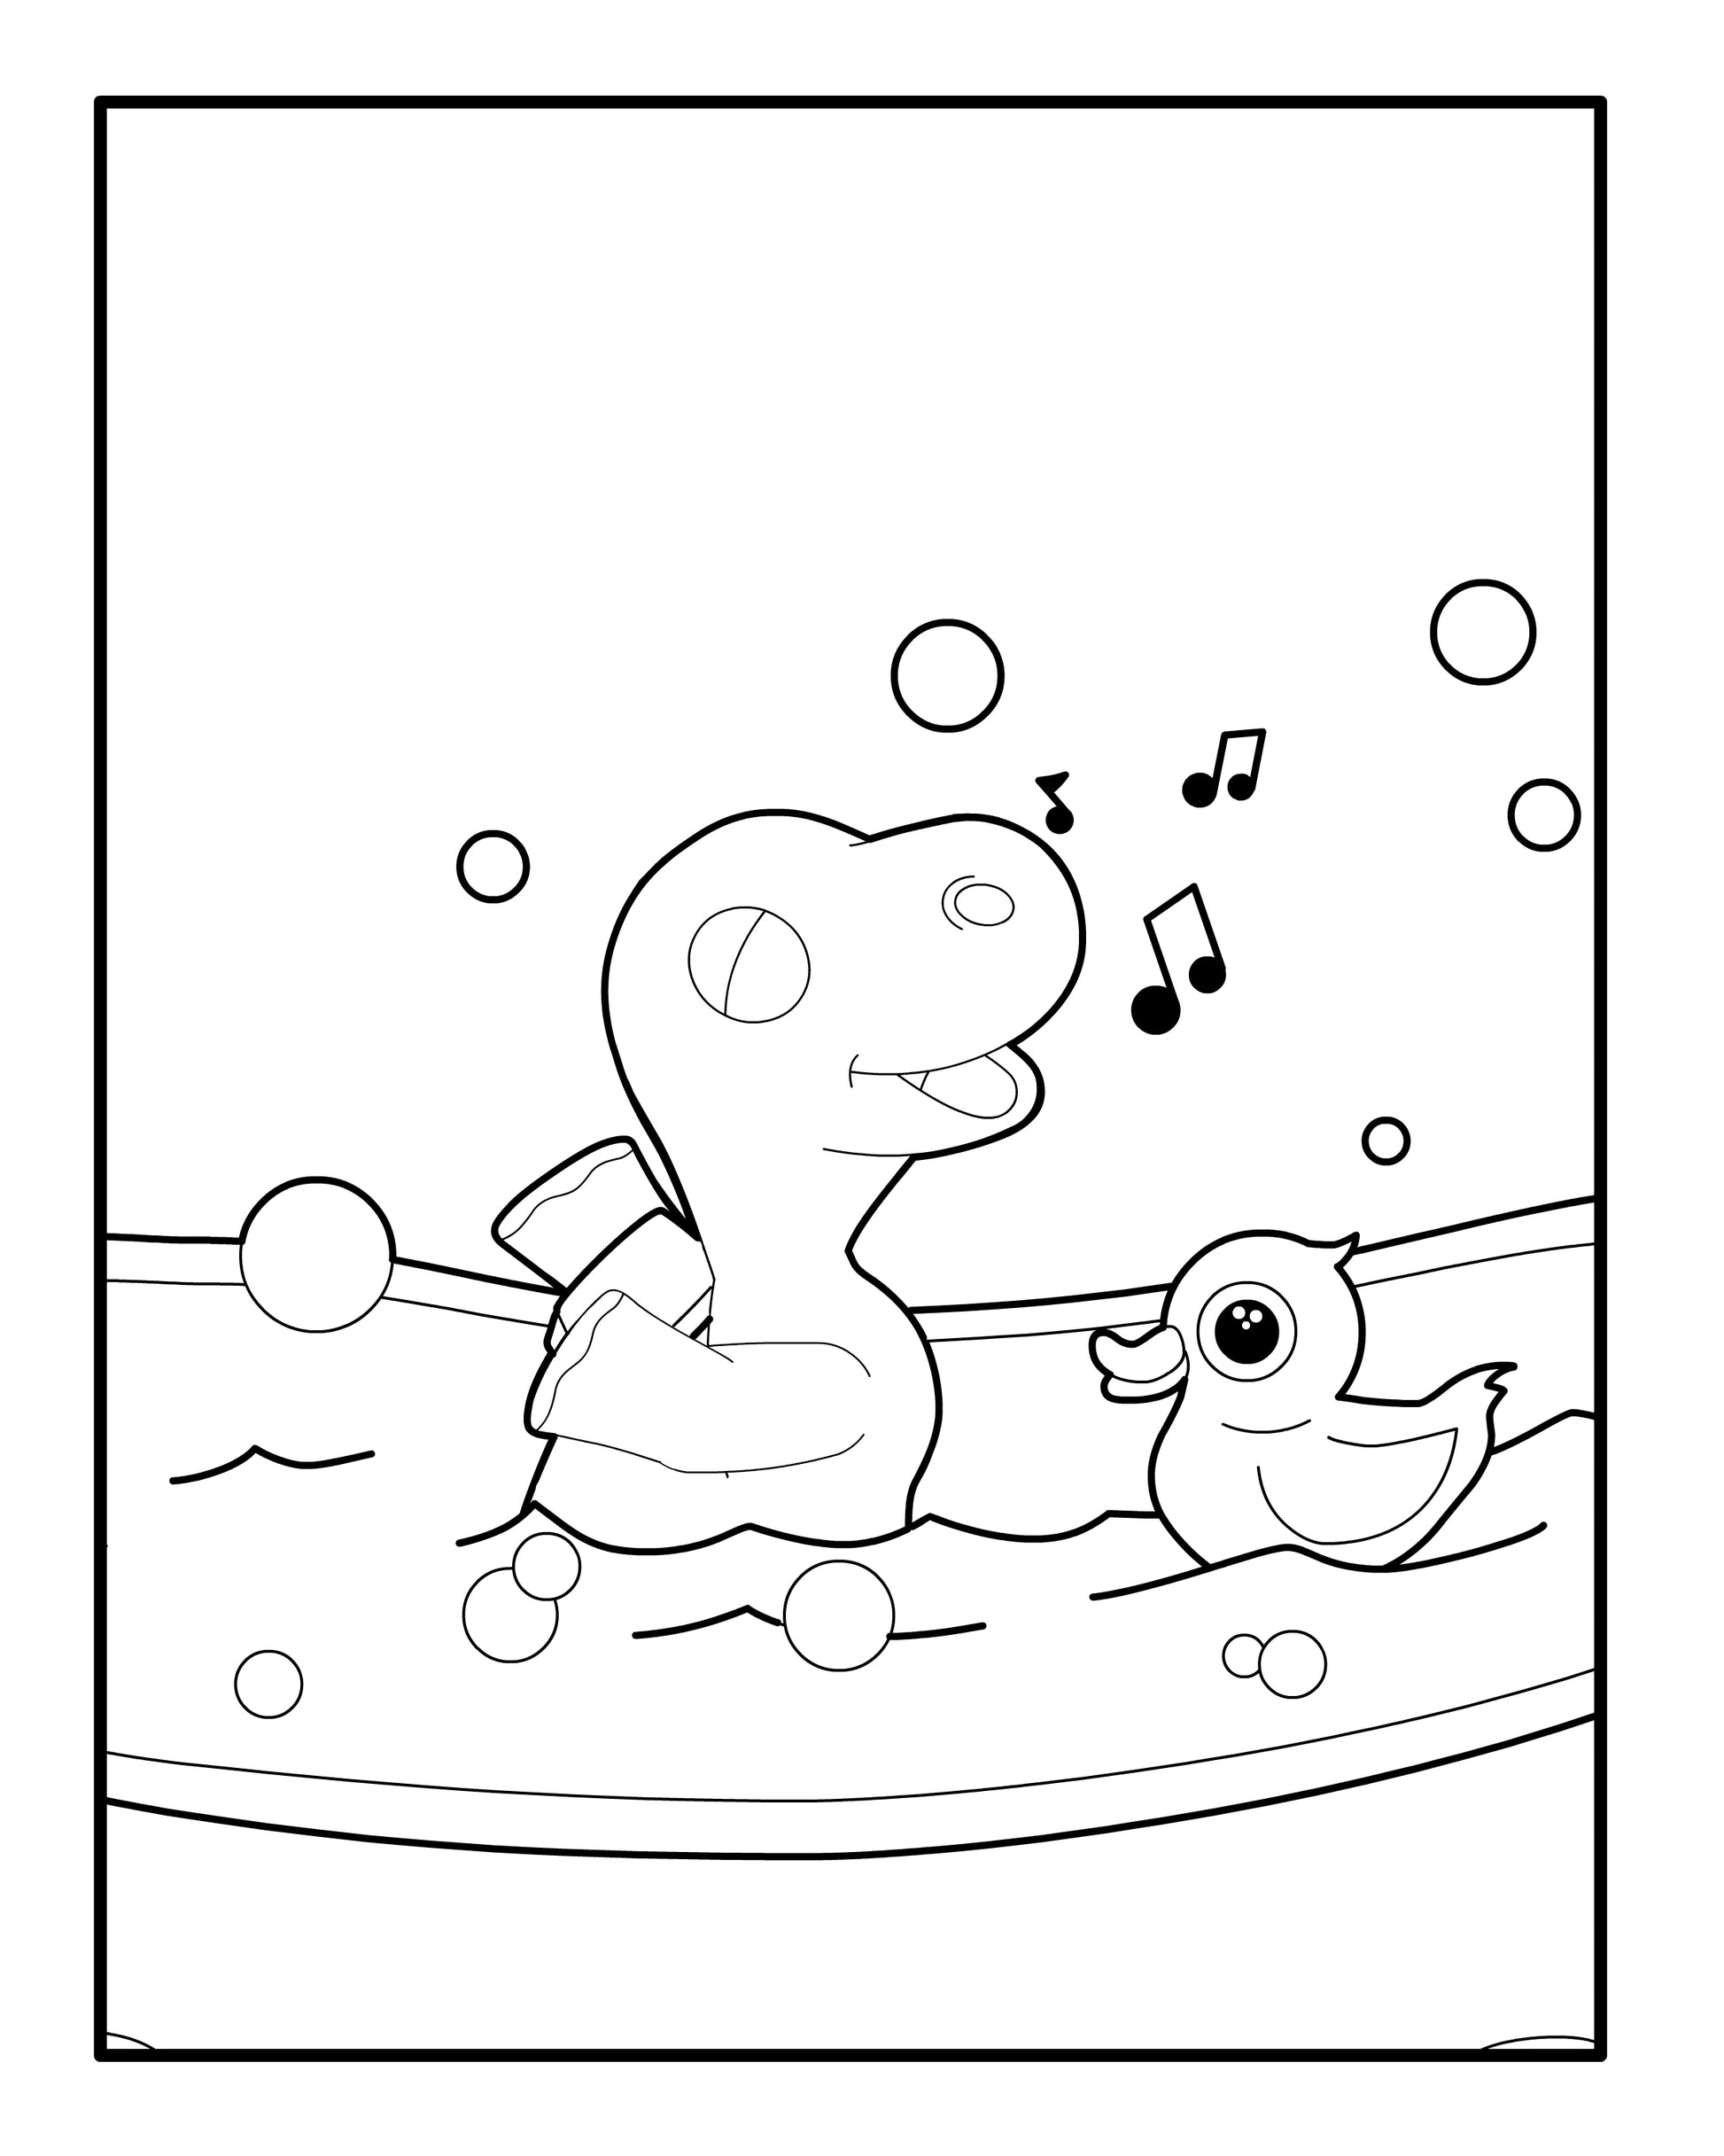 A black and white coloring page depicting a cartoon dinosaur enjoying a bath with a rubber ducky. The dinosaur, donning a playful smile, is surrounded by soap bubbles and musical notes, suggesting a lighthearted singing moment in the tub.